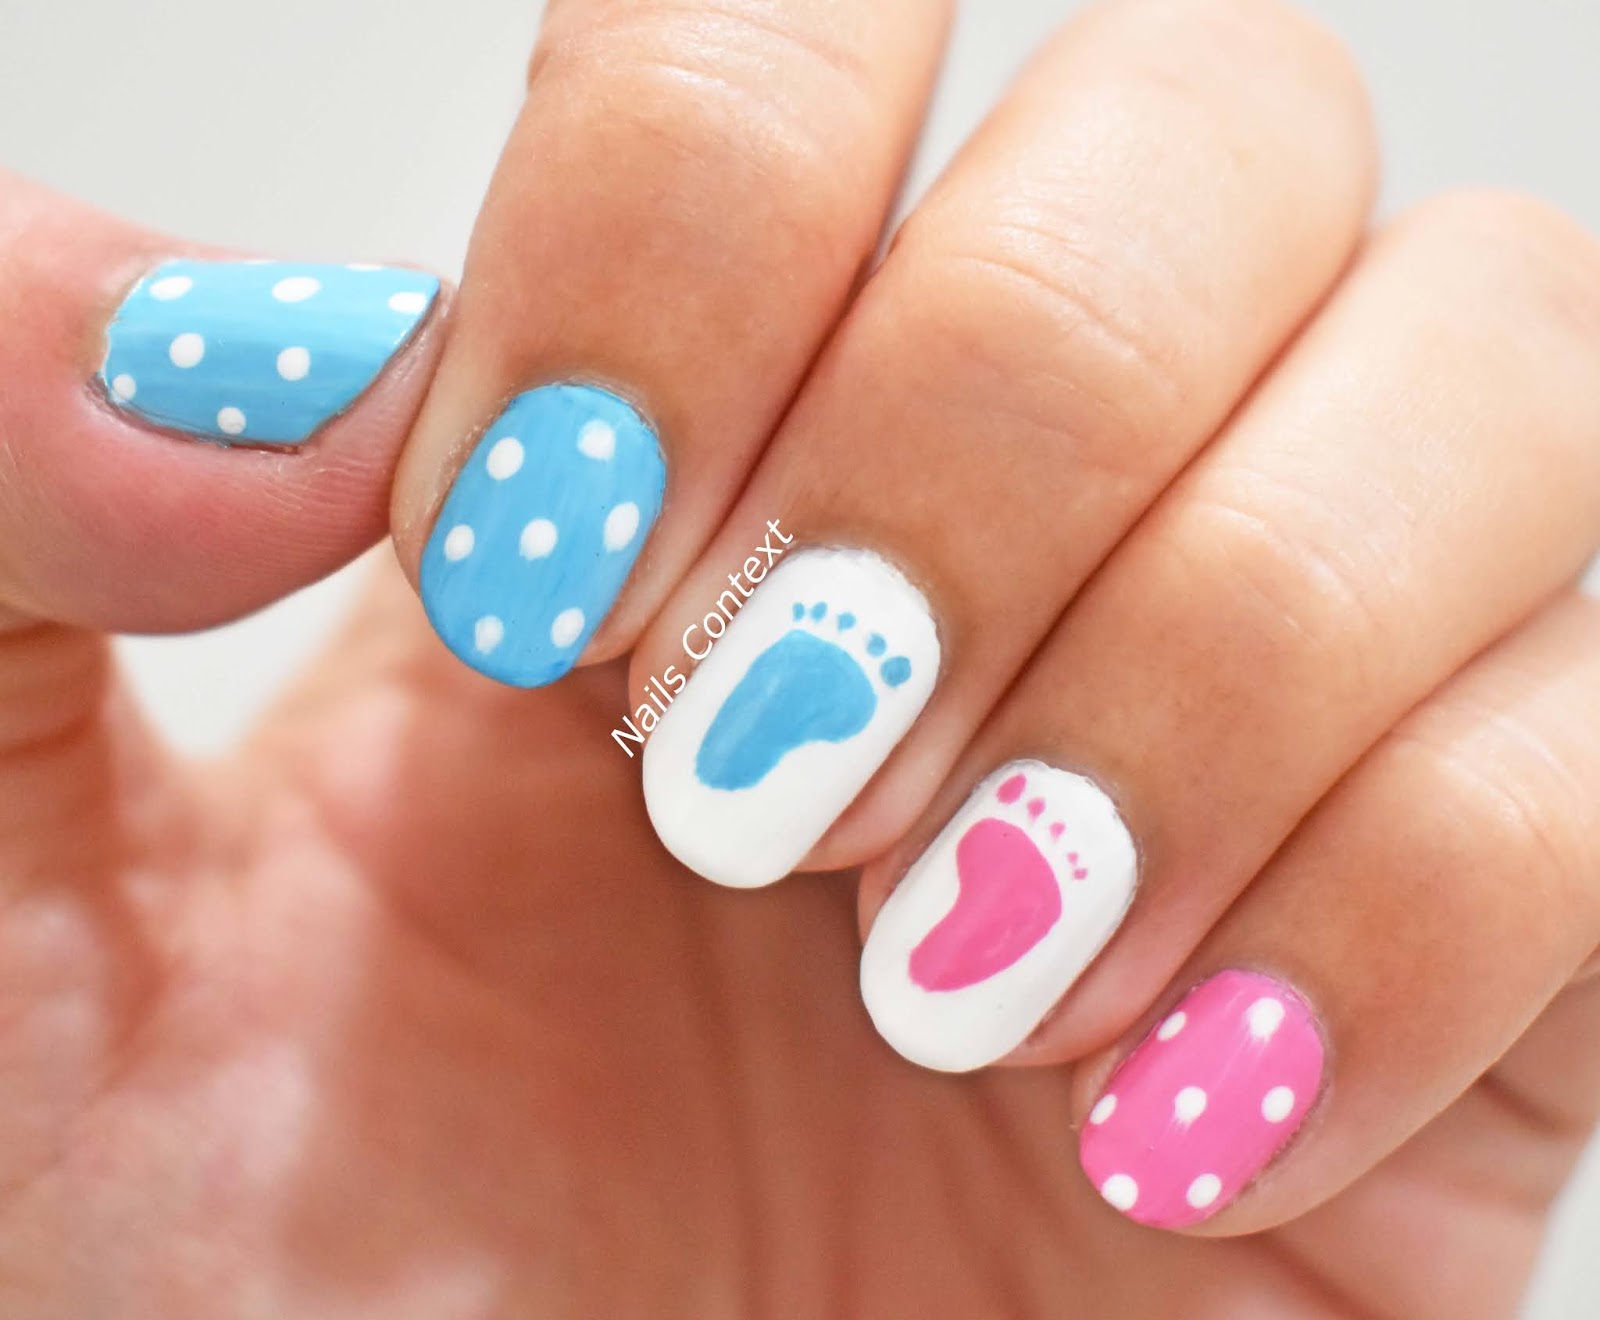 Acrylic Gender Reveal Nail Design Ideas - wide 6